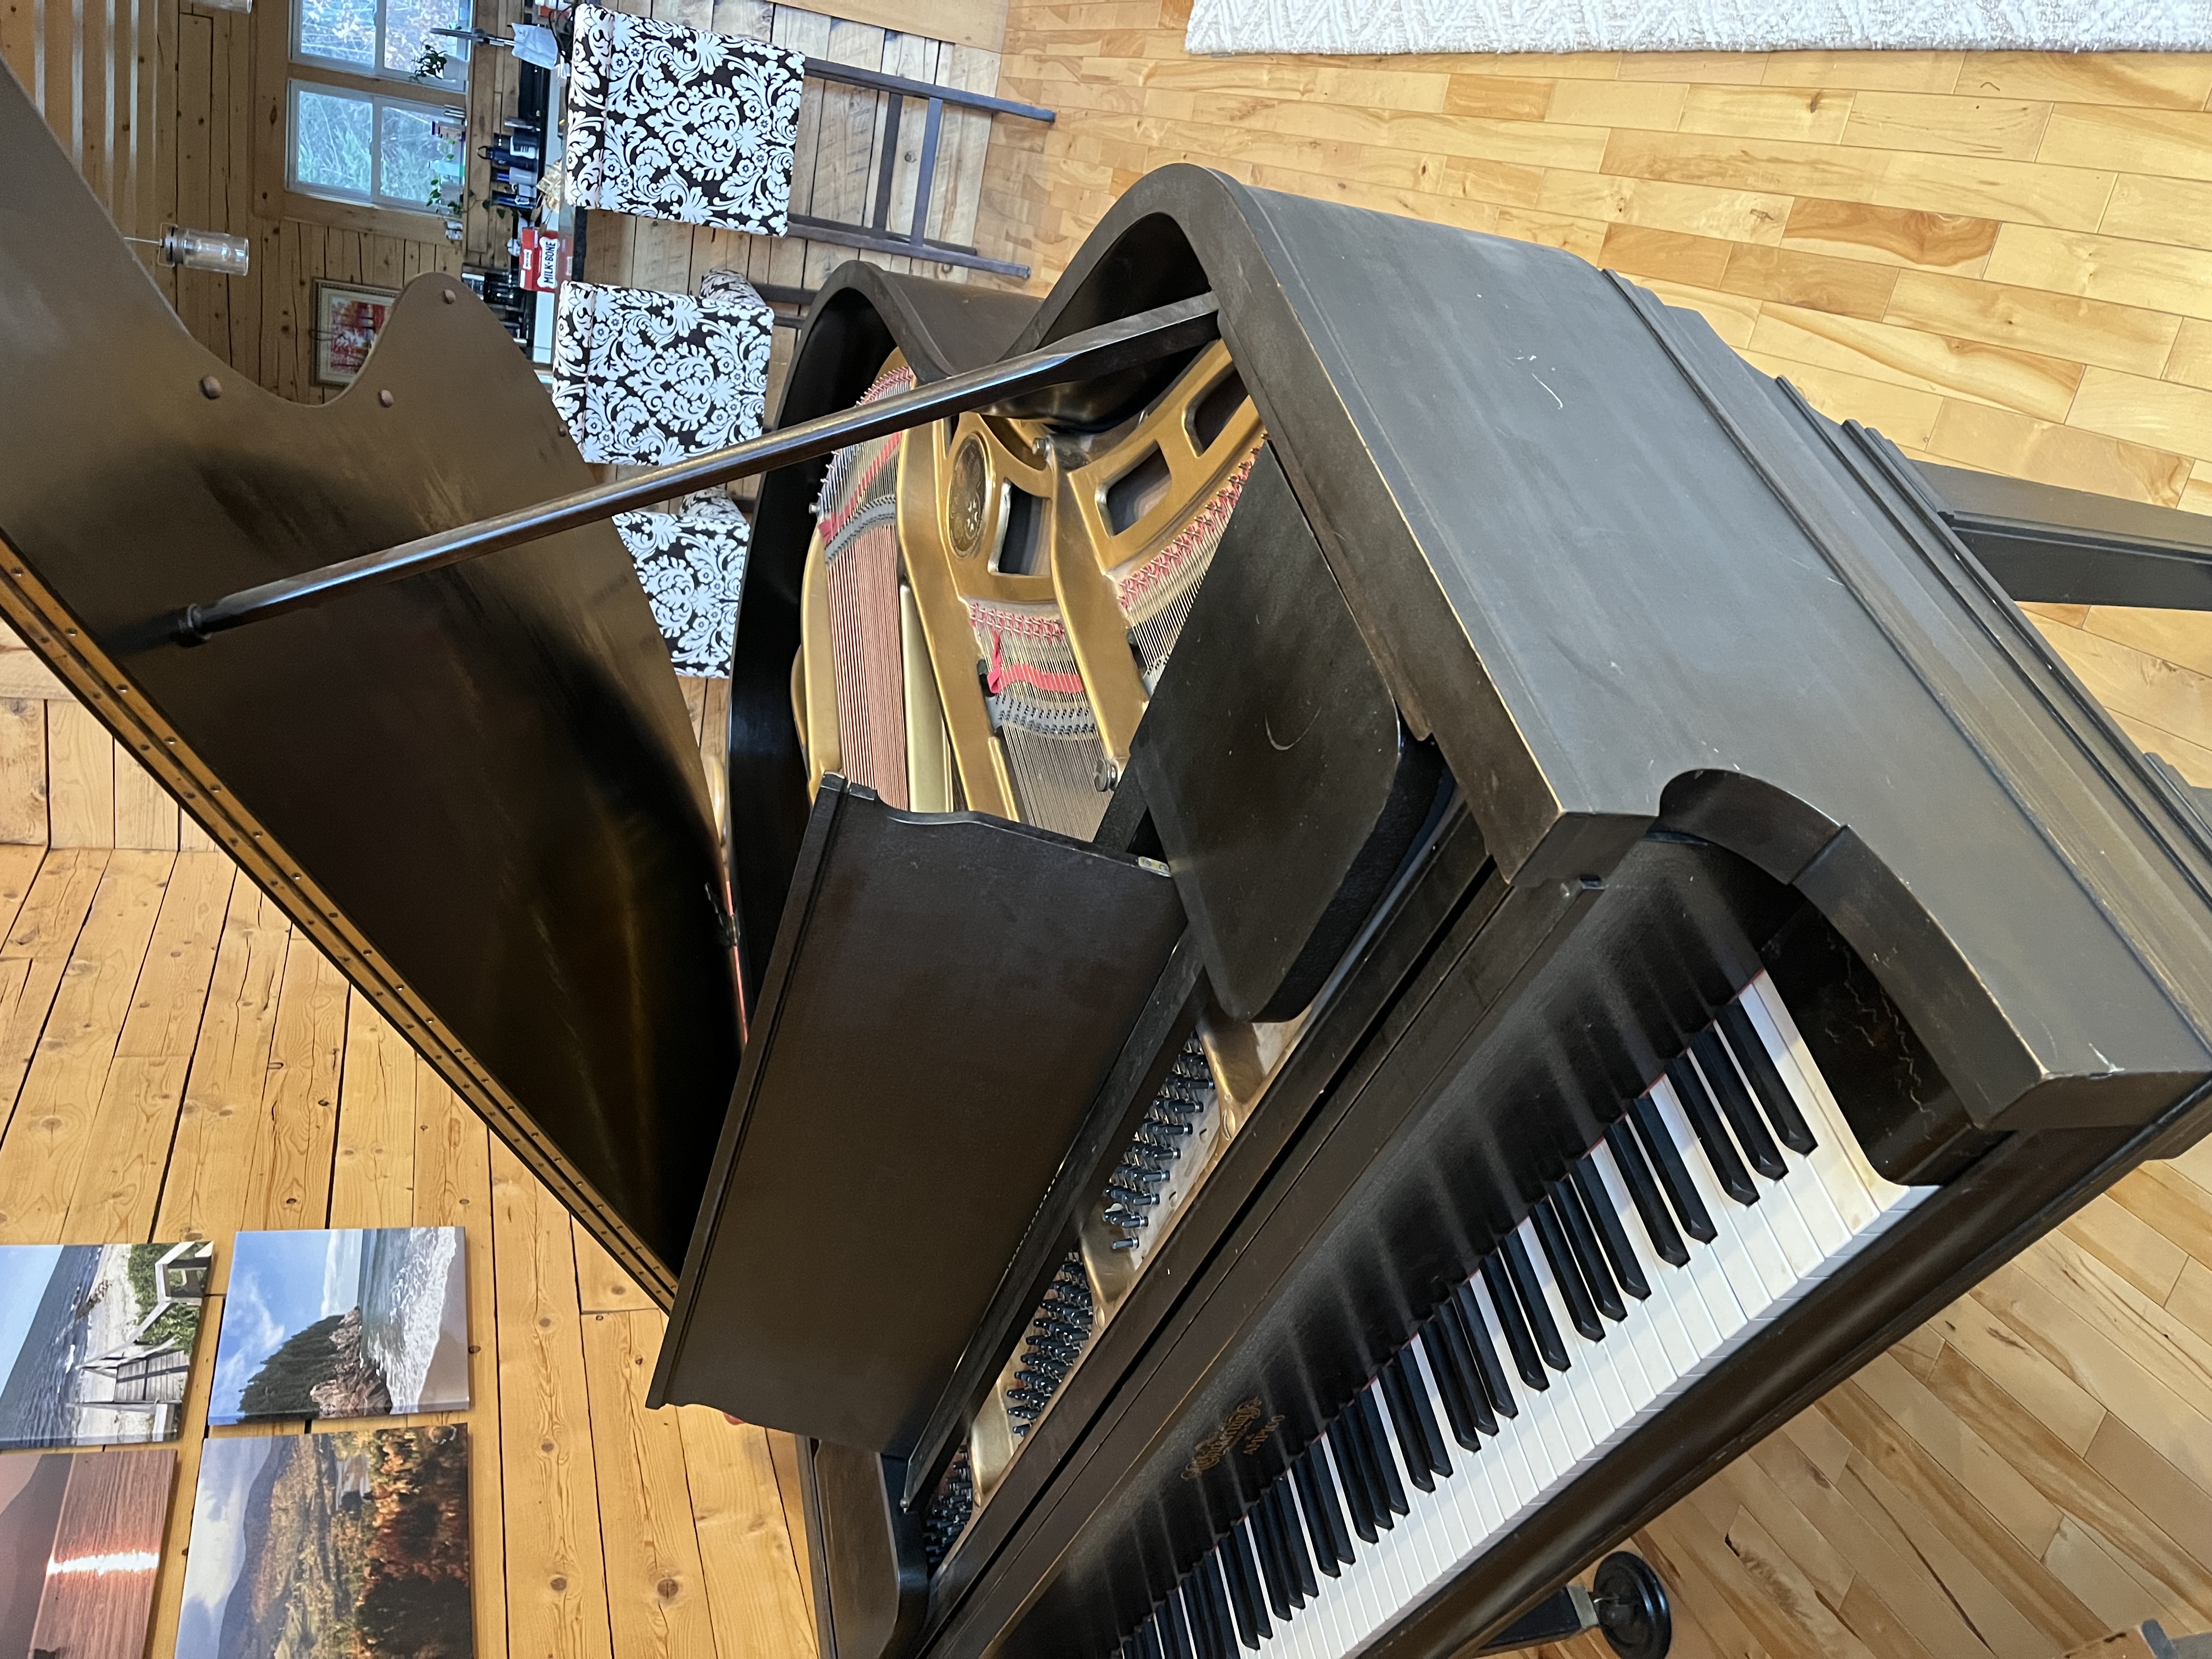 Completely restored Chickering Grand Piano